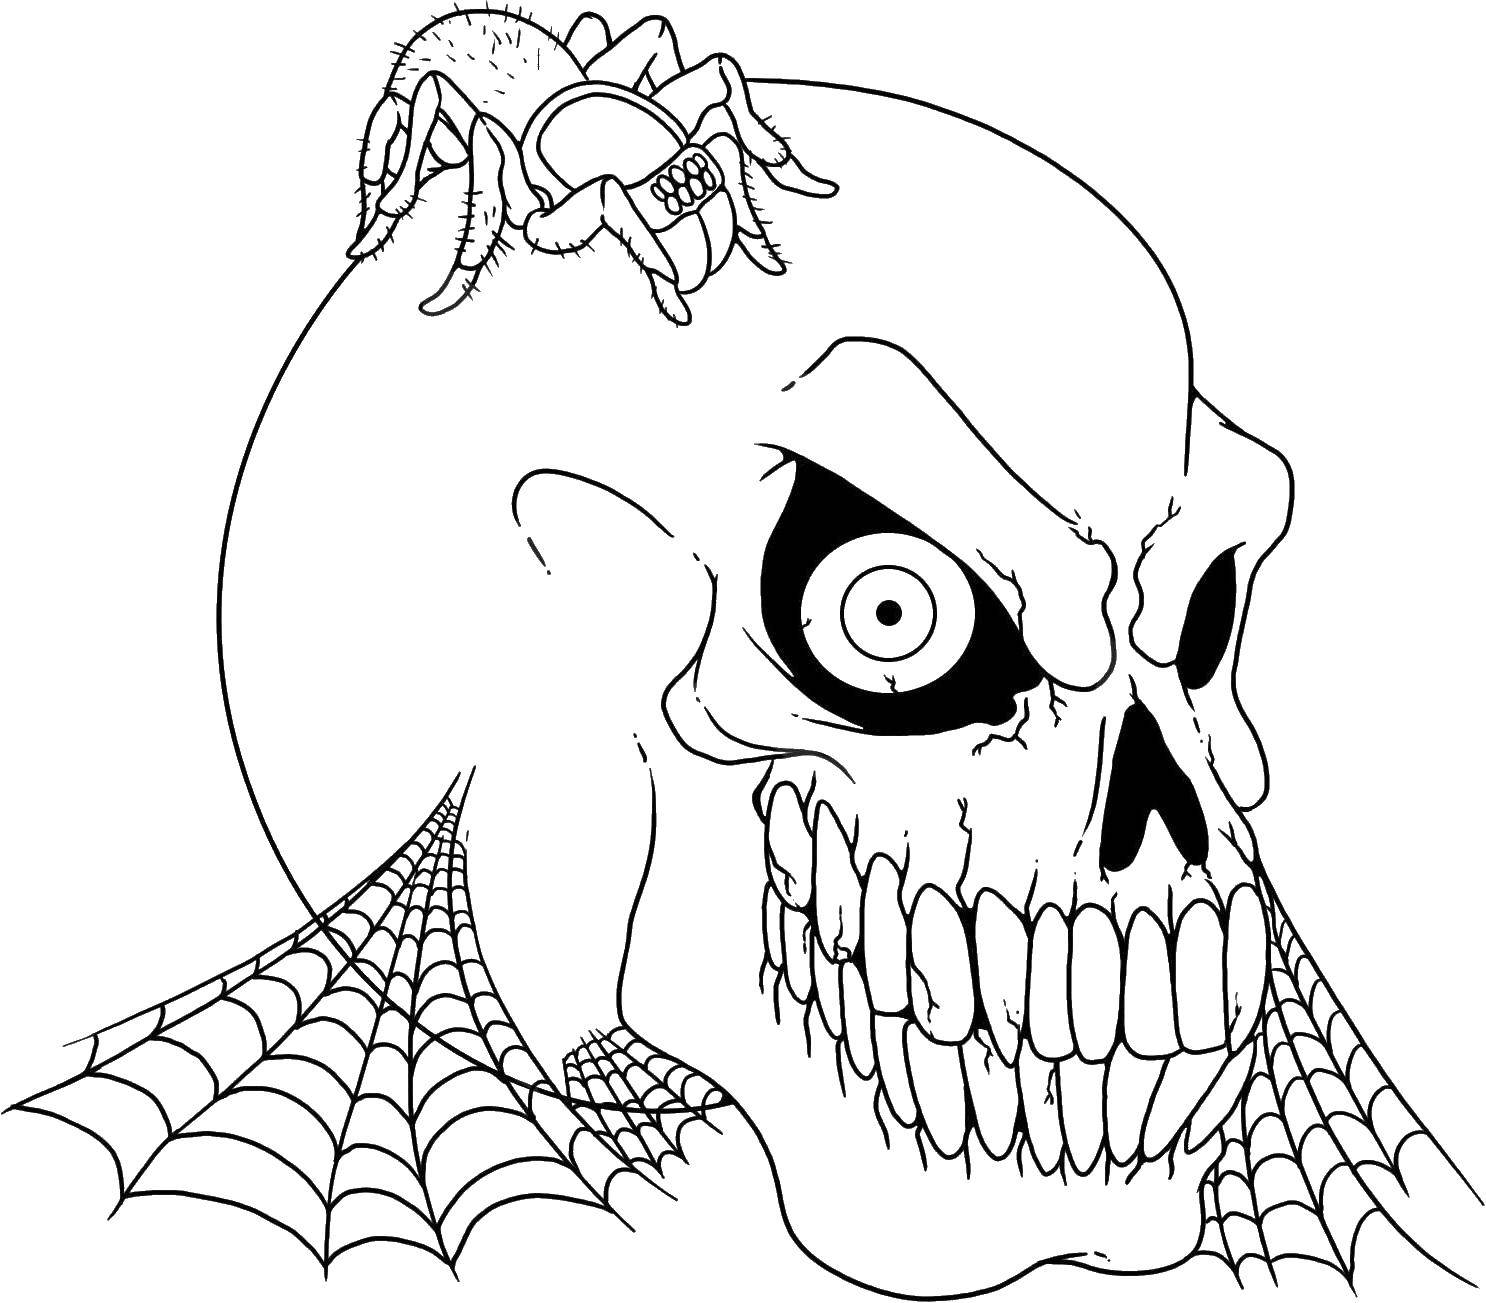 Coloring Skull with spider. Category skull. Tags:  skull, spiders.